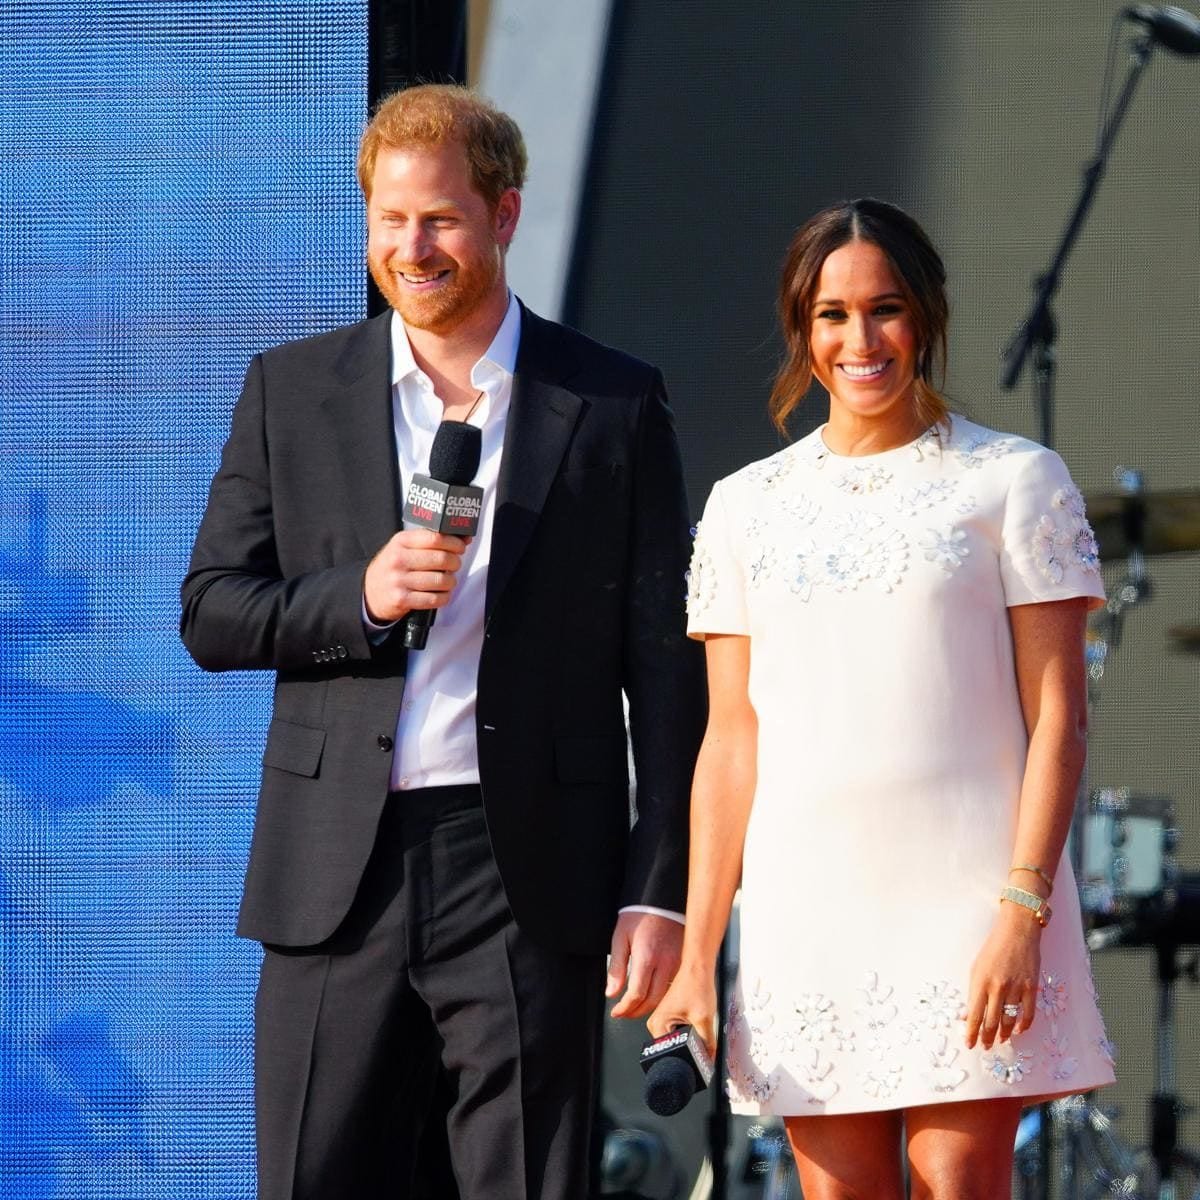 Meghan and Harry moved to California in 2020